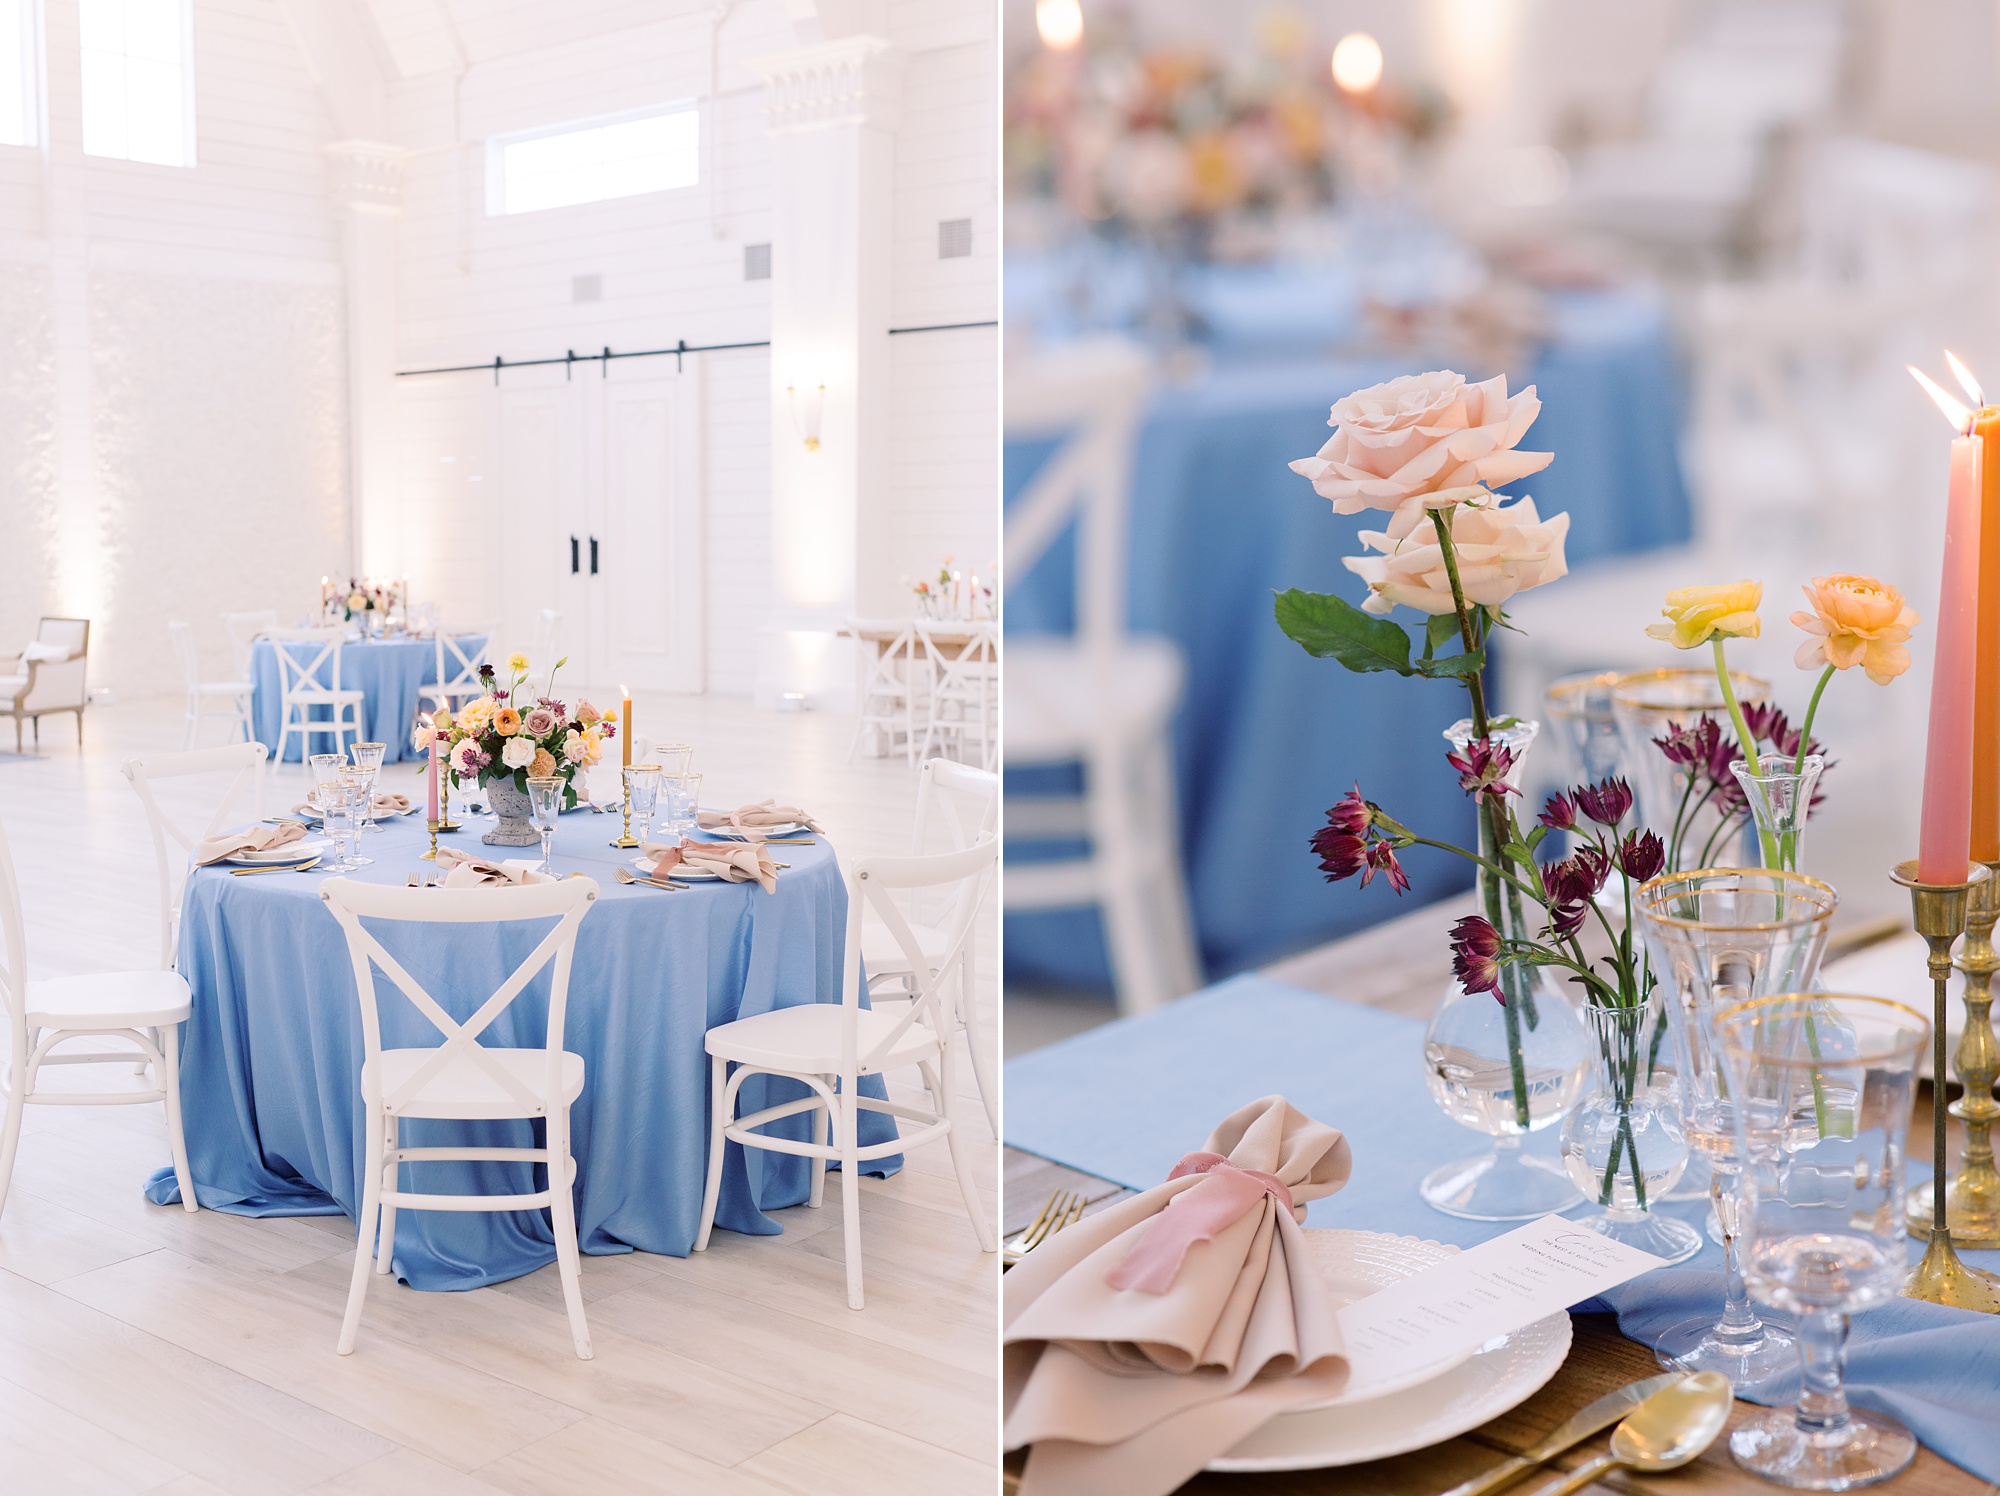 wedding reception at Texas venue photographed by Courtney Bosworth Photography